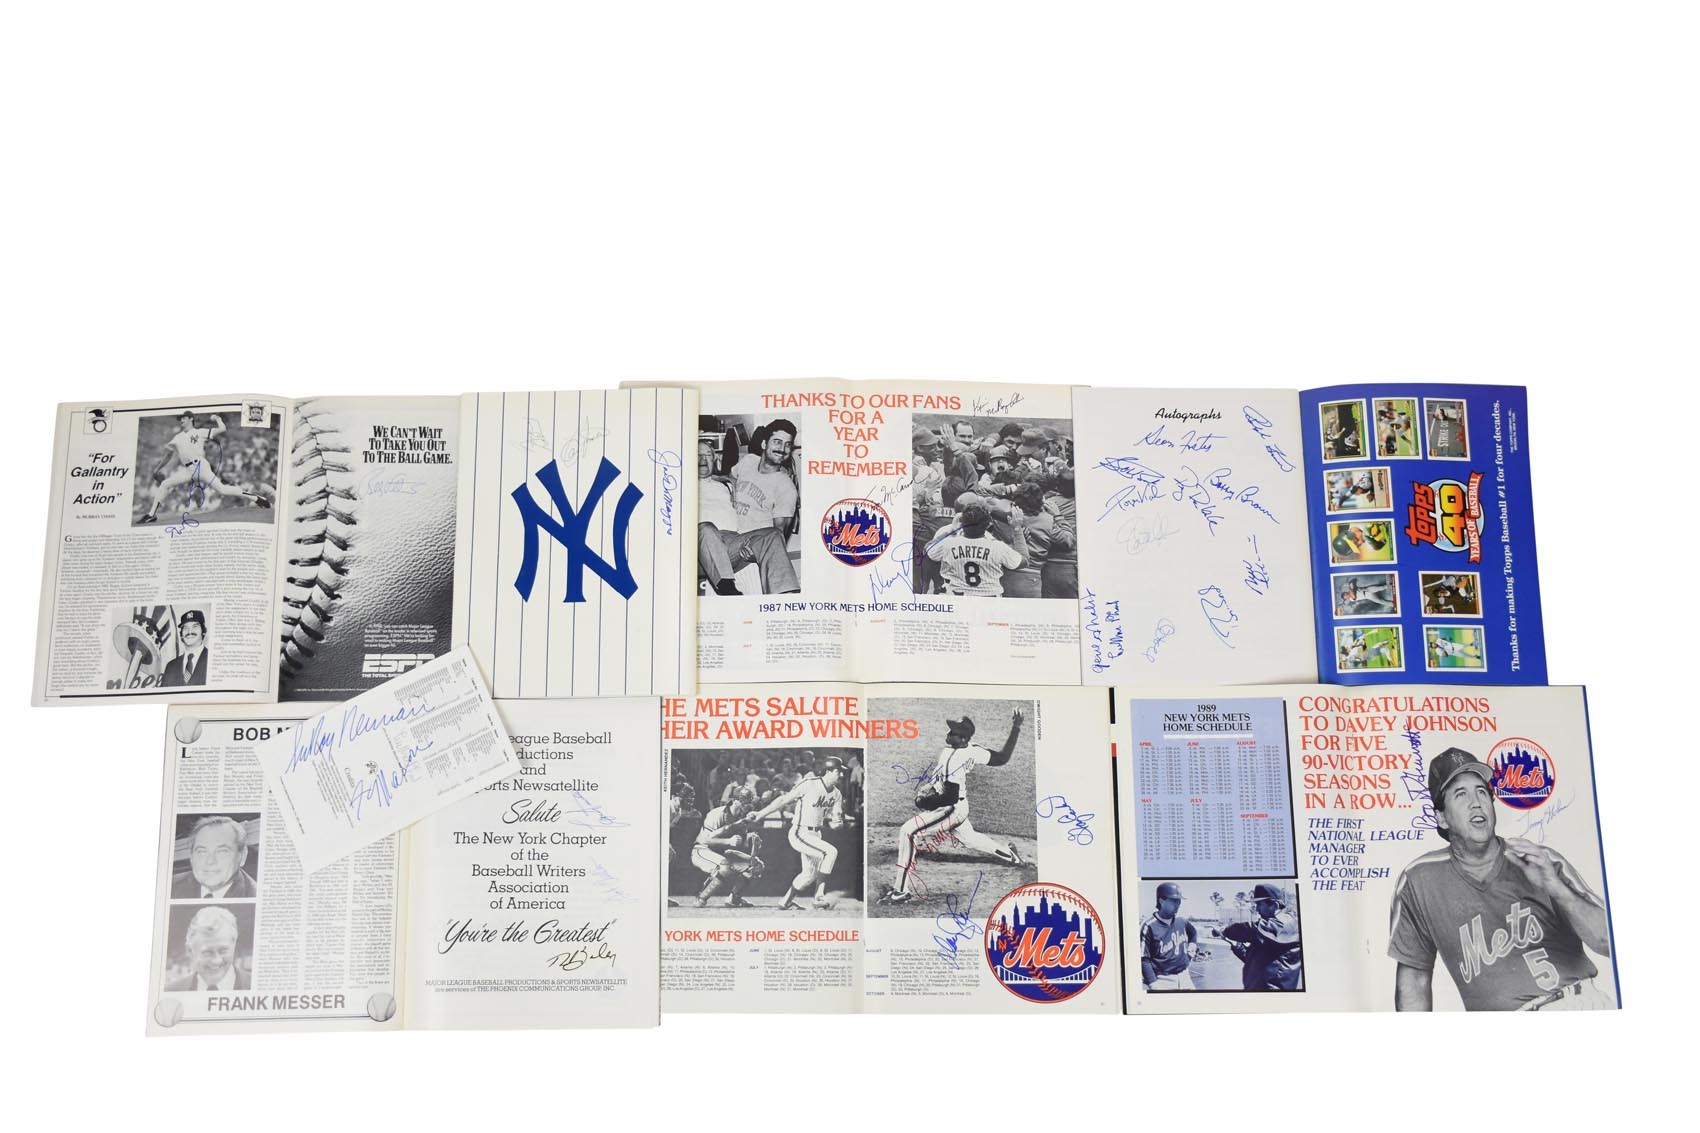 Baseball Autographs - 1980s-90s Baseball Writers Signed Programs Obtained by Attendee (137 Signatures)